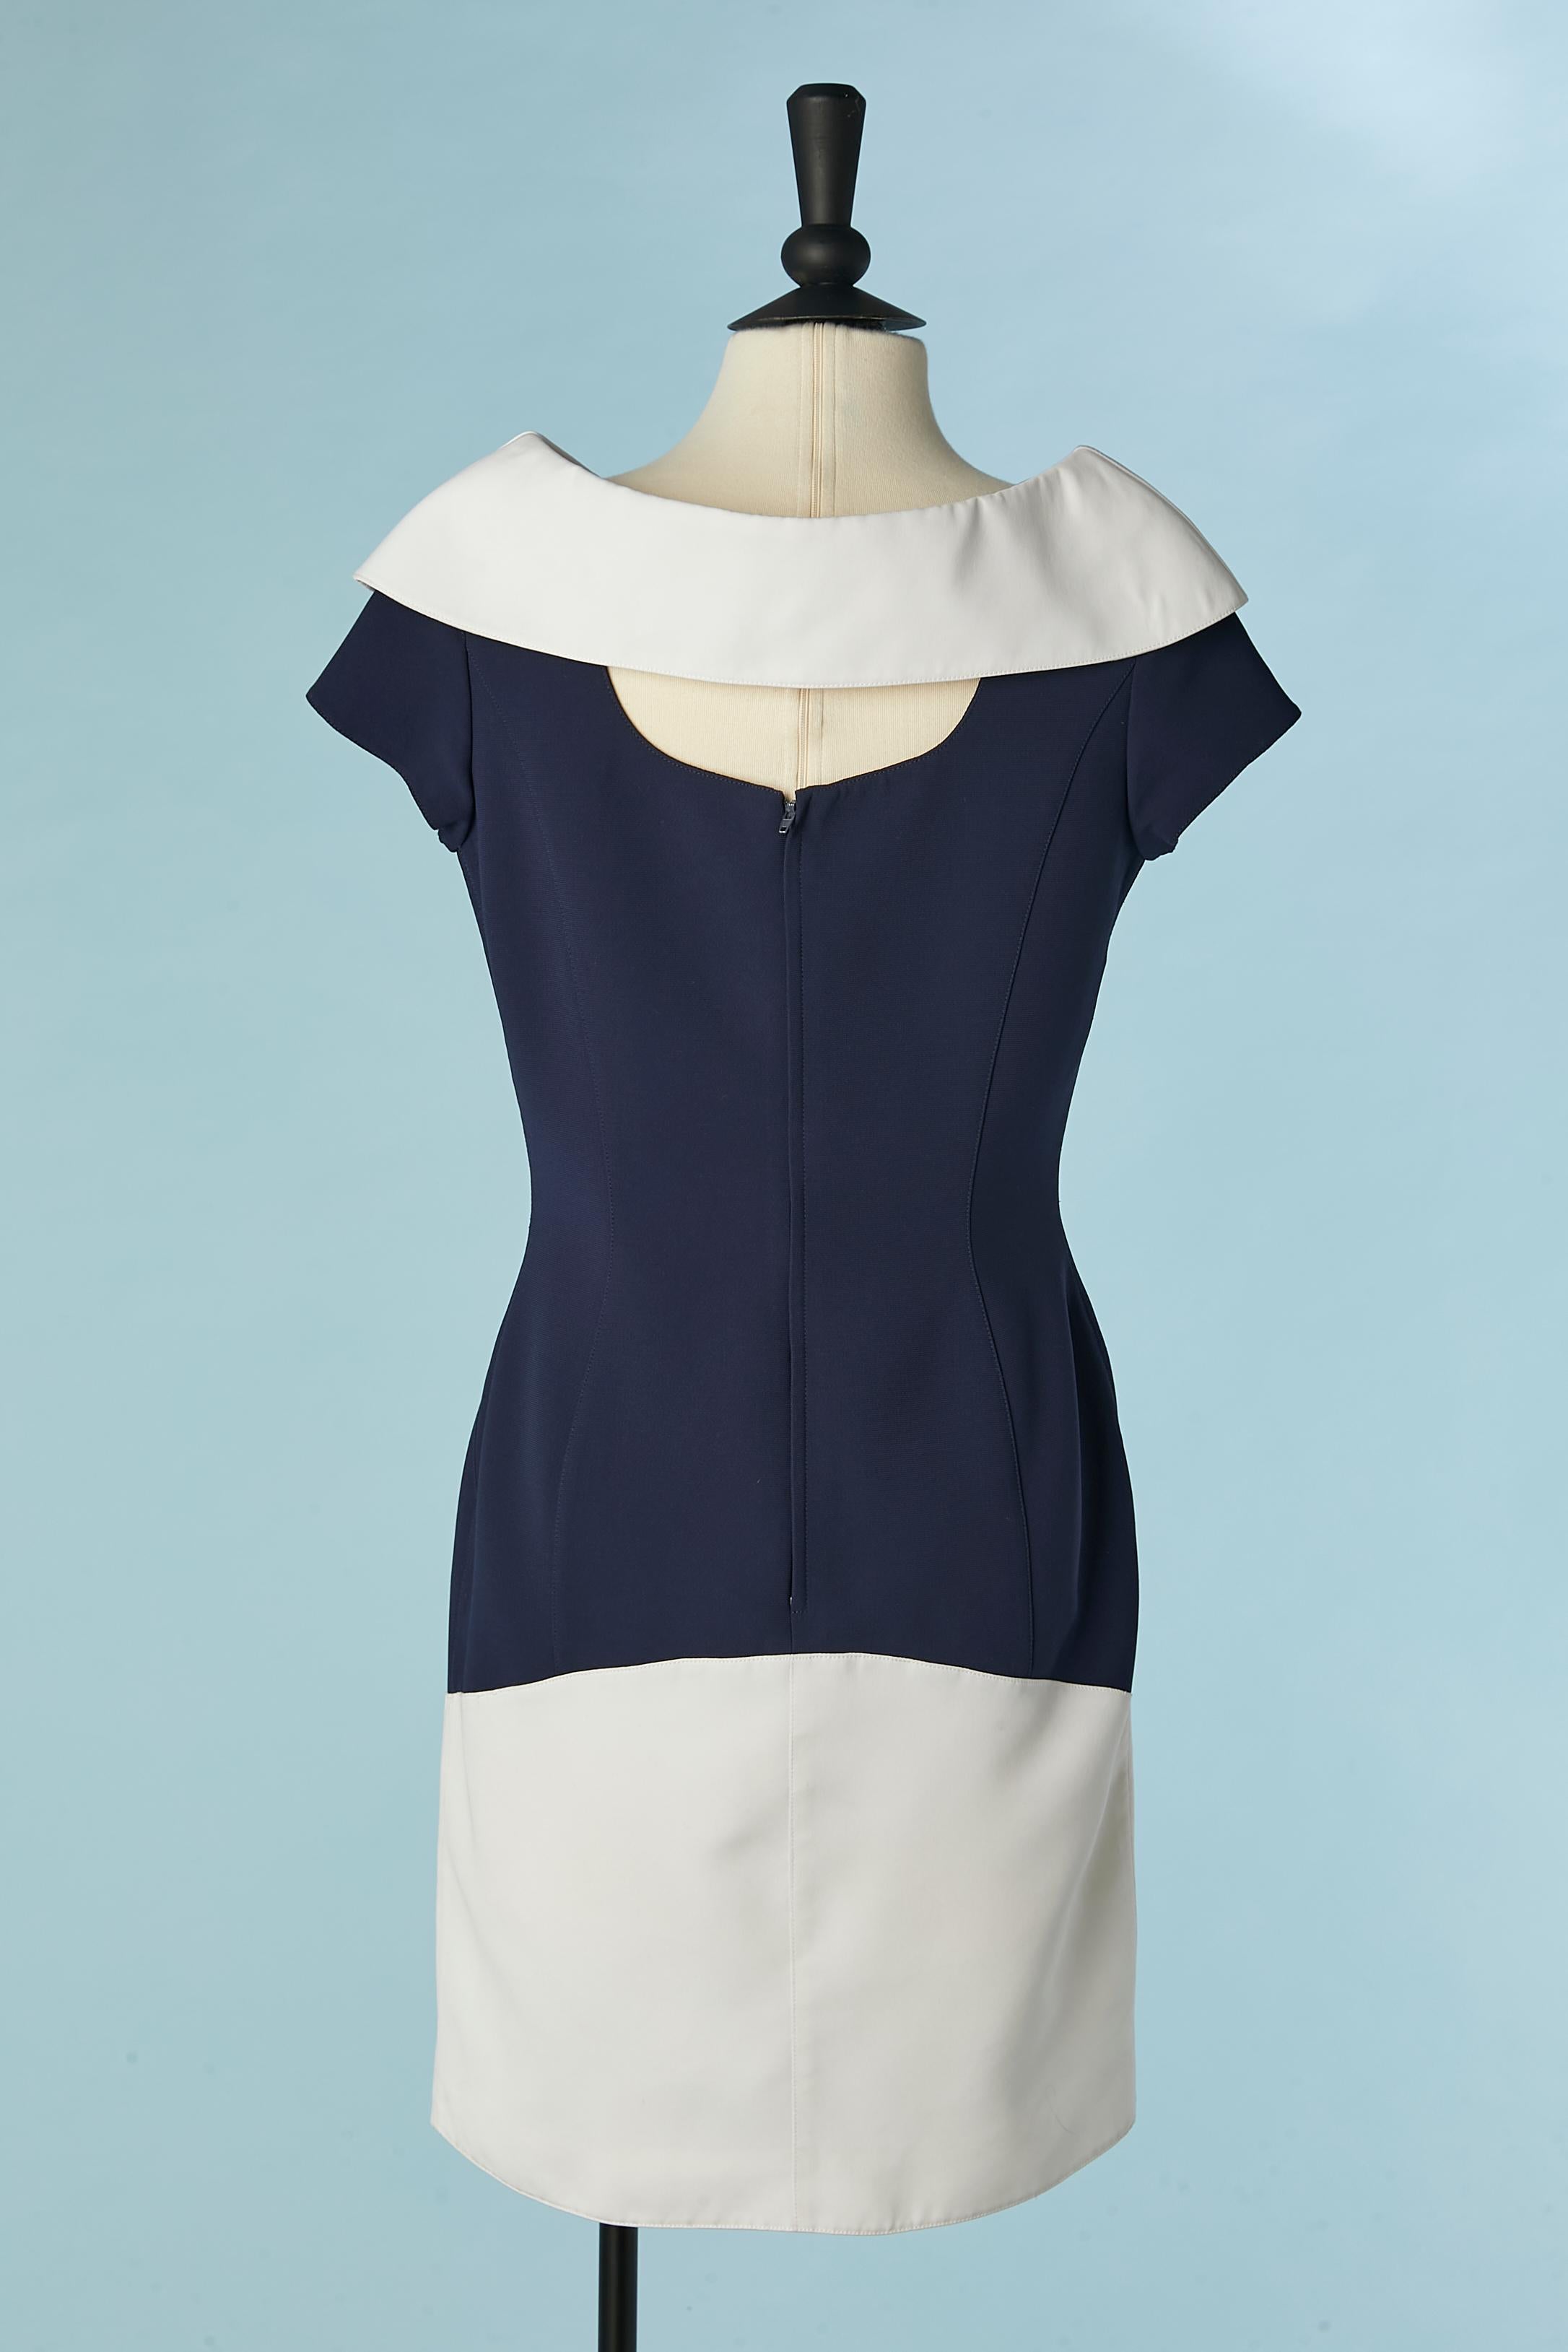 Women's Navy blue dress with white collar and edge Thierry Mugler  For Sale